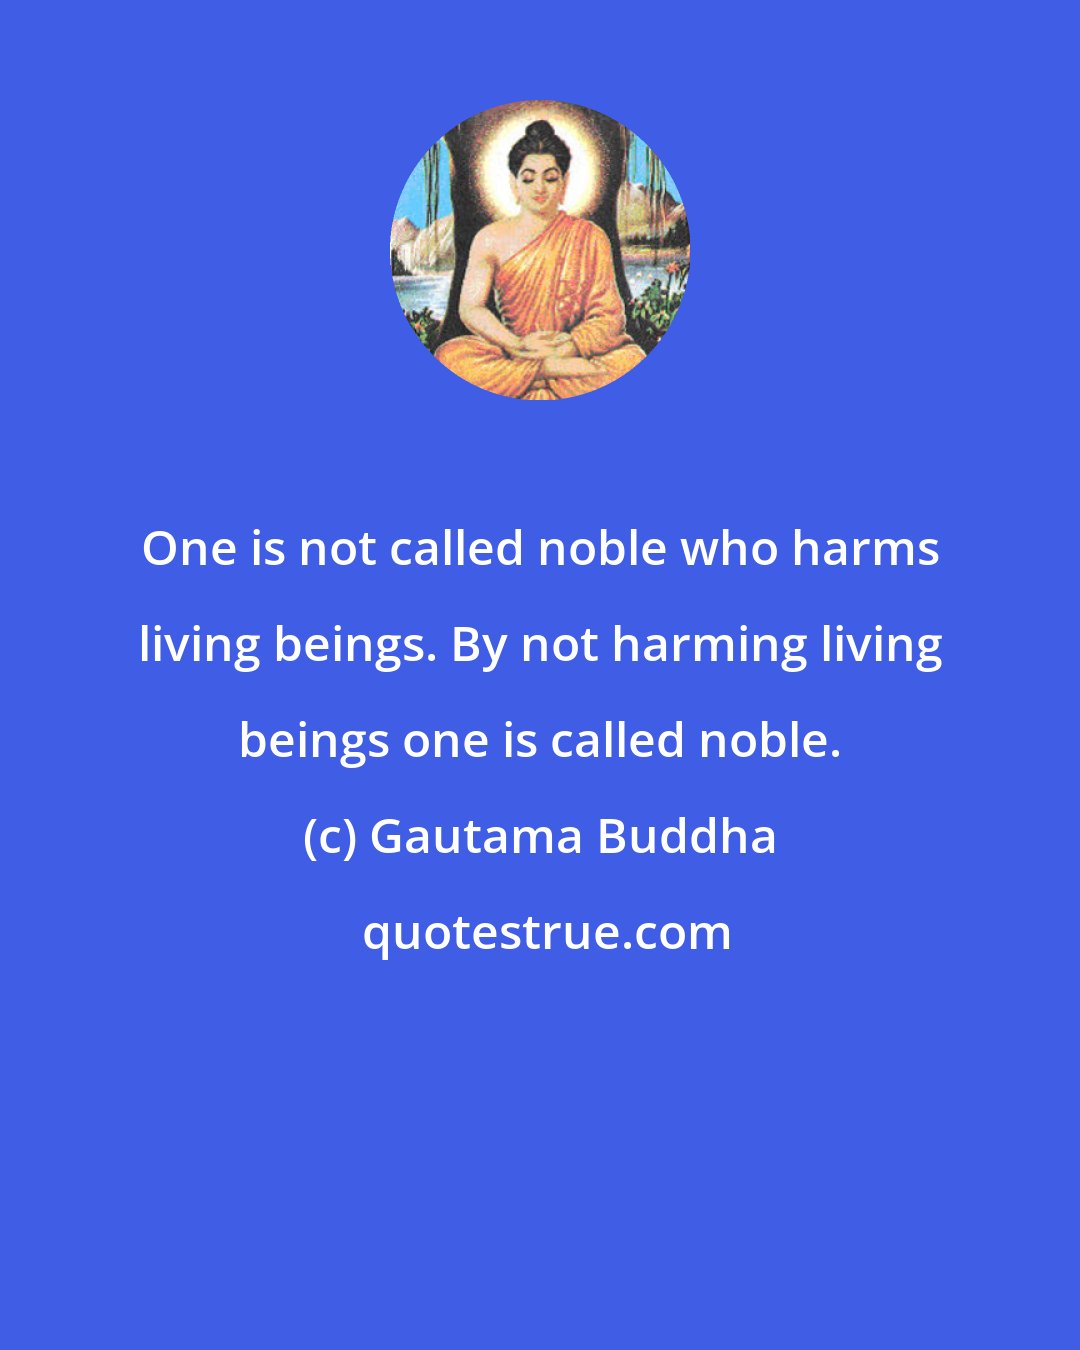 Gautama Buddha: One is not called noble who harms living beings. By not harming living beings one is called noble.